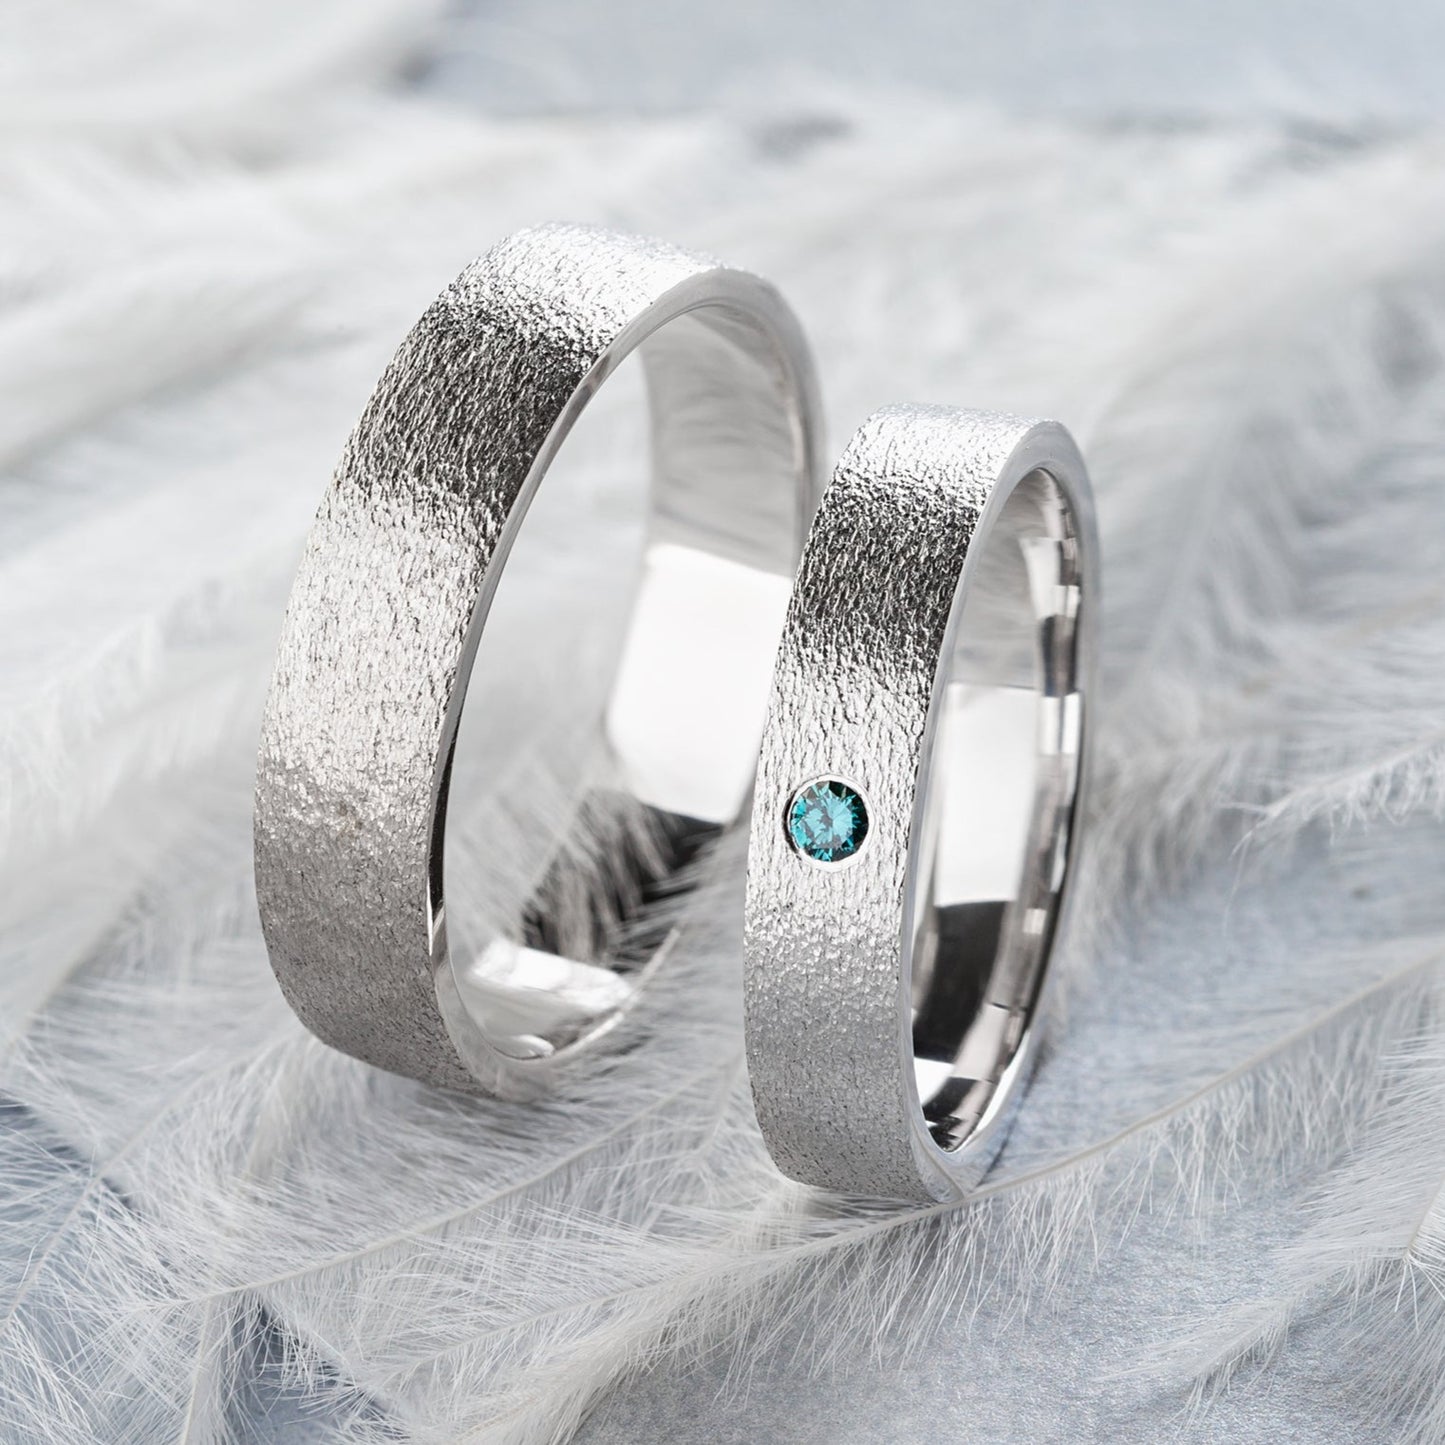 Textured wedding bands with blue diamond. Unique wedding bands. Couple rings. Wedding rings set. Matching wedding rings. White gold rings. Blue diamond wedding bands. Couple rings set